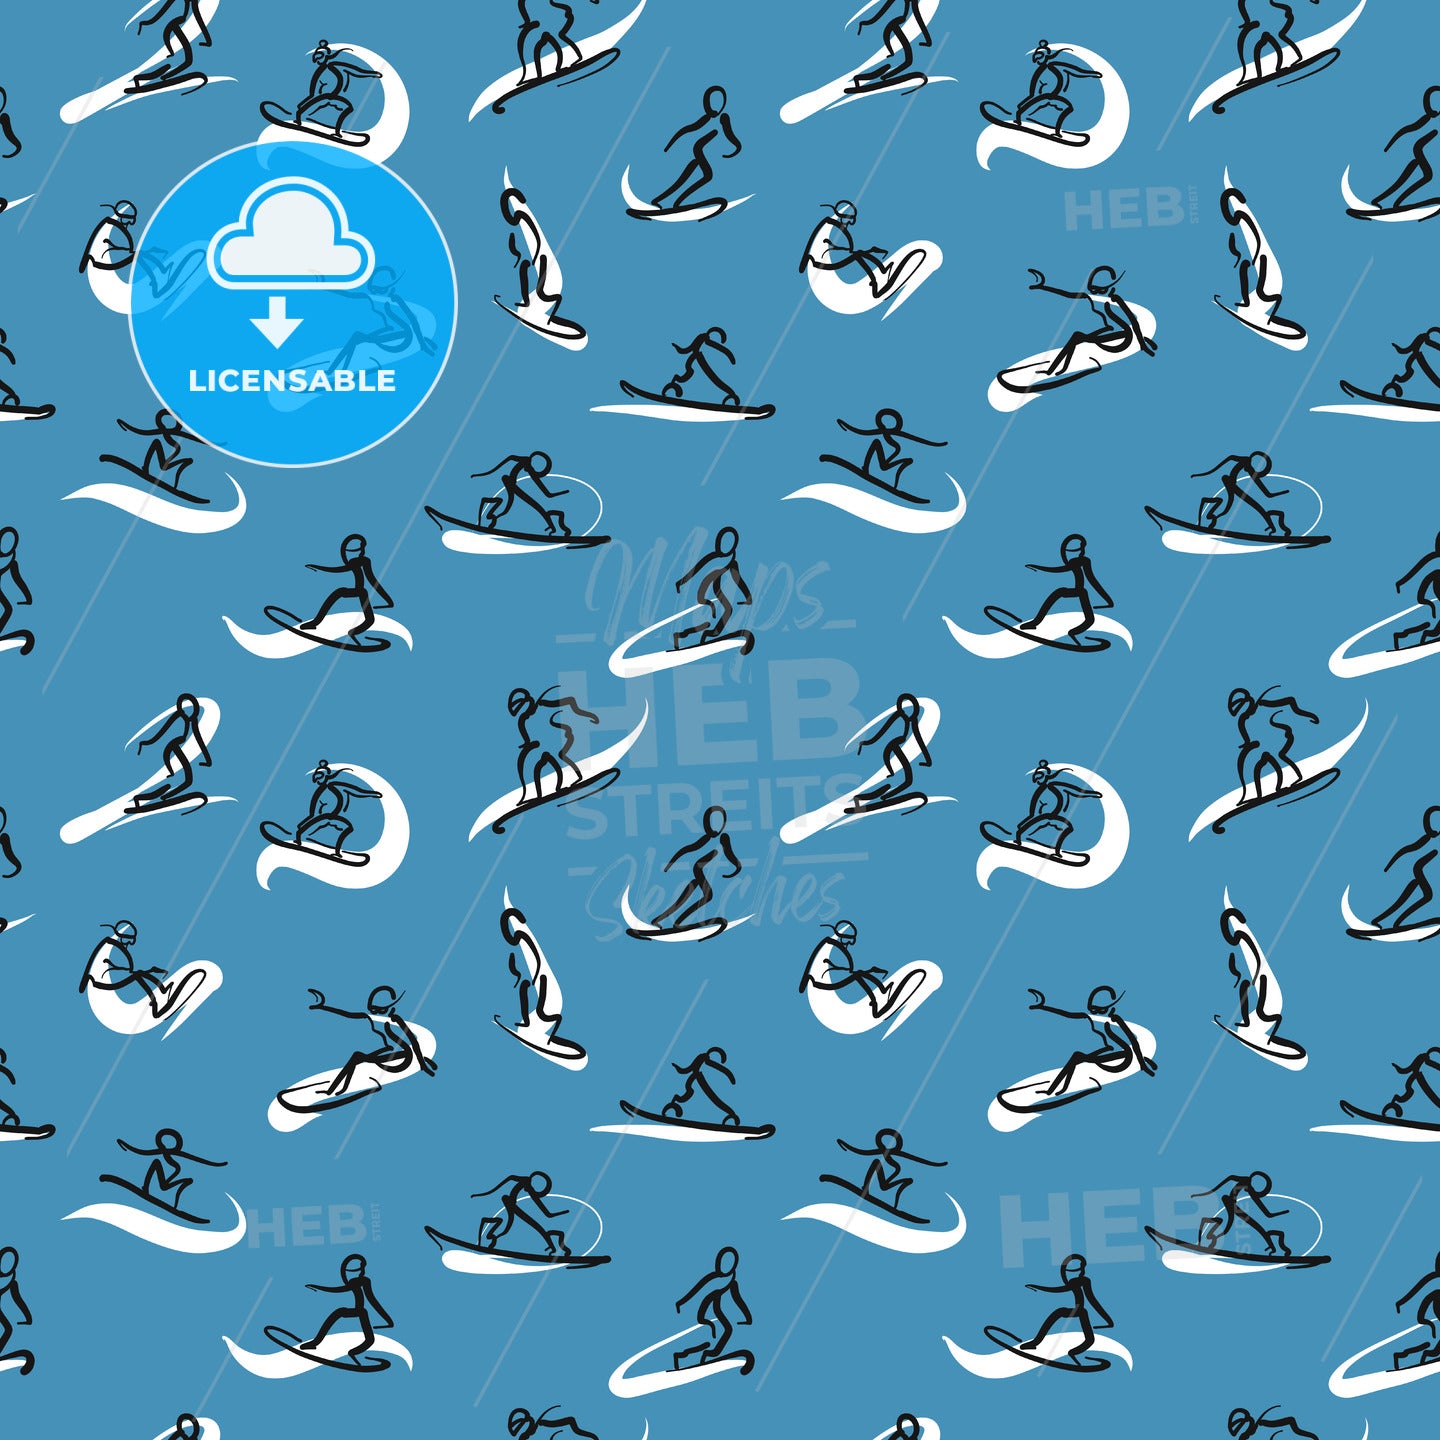 Hand drawn snowboarder icons, seamless pattern on colored backgound – instant download